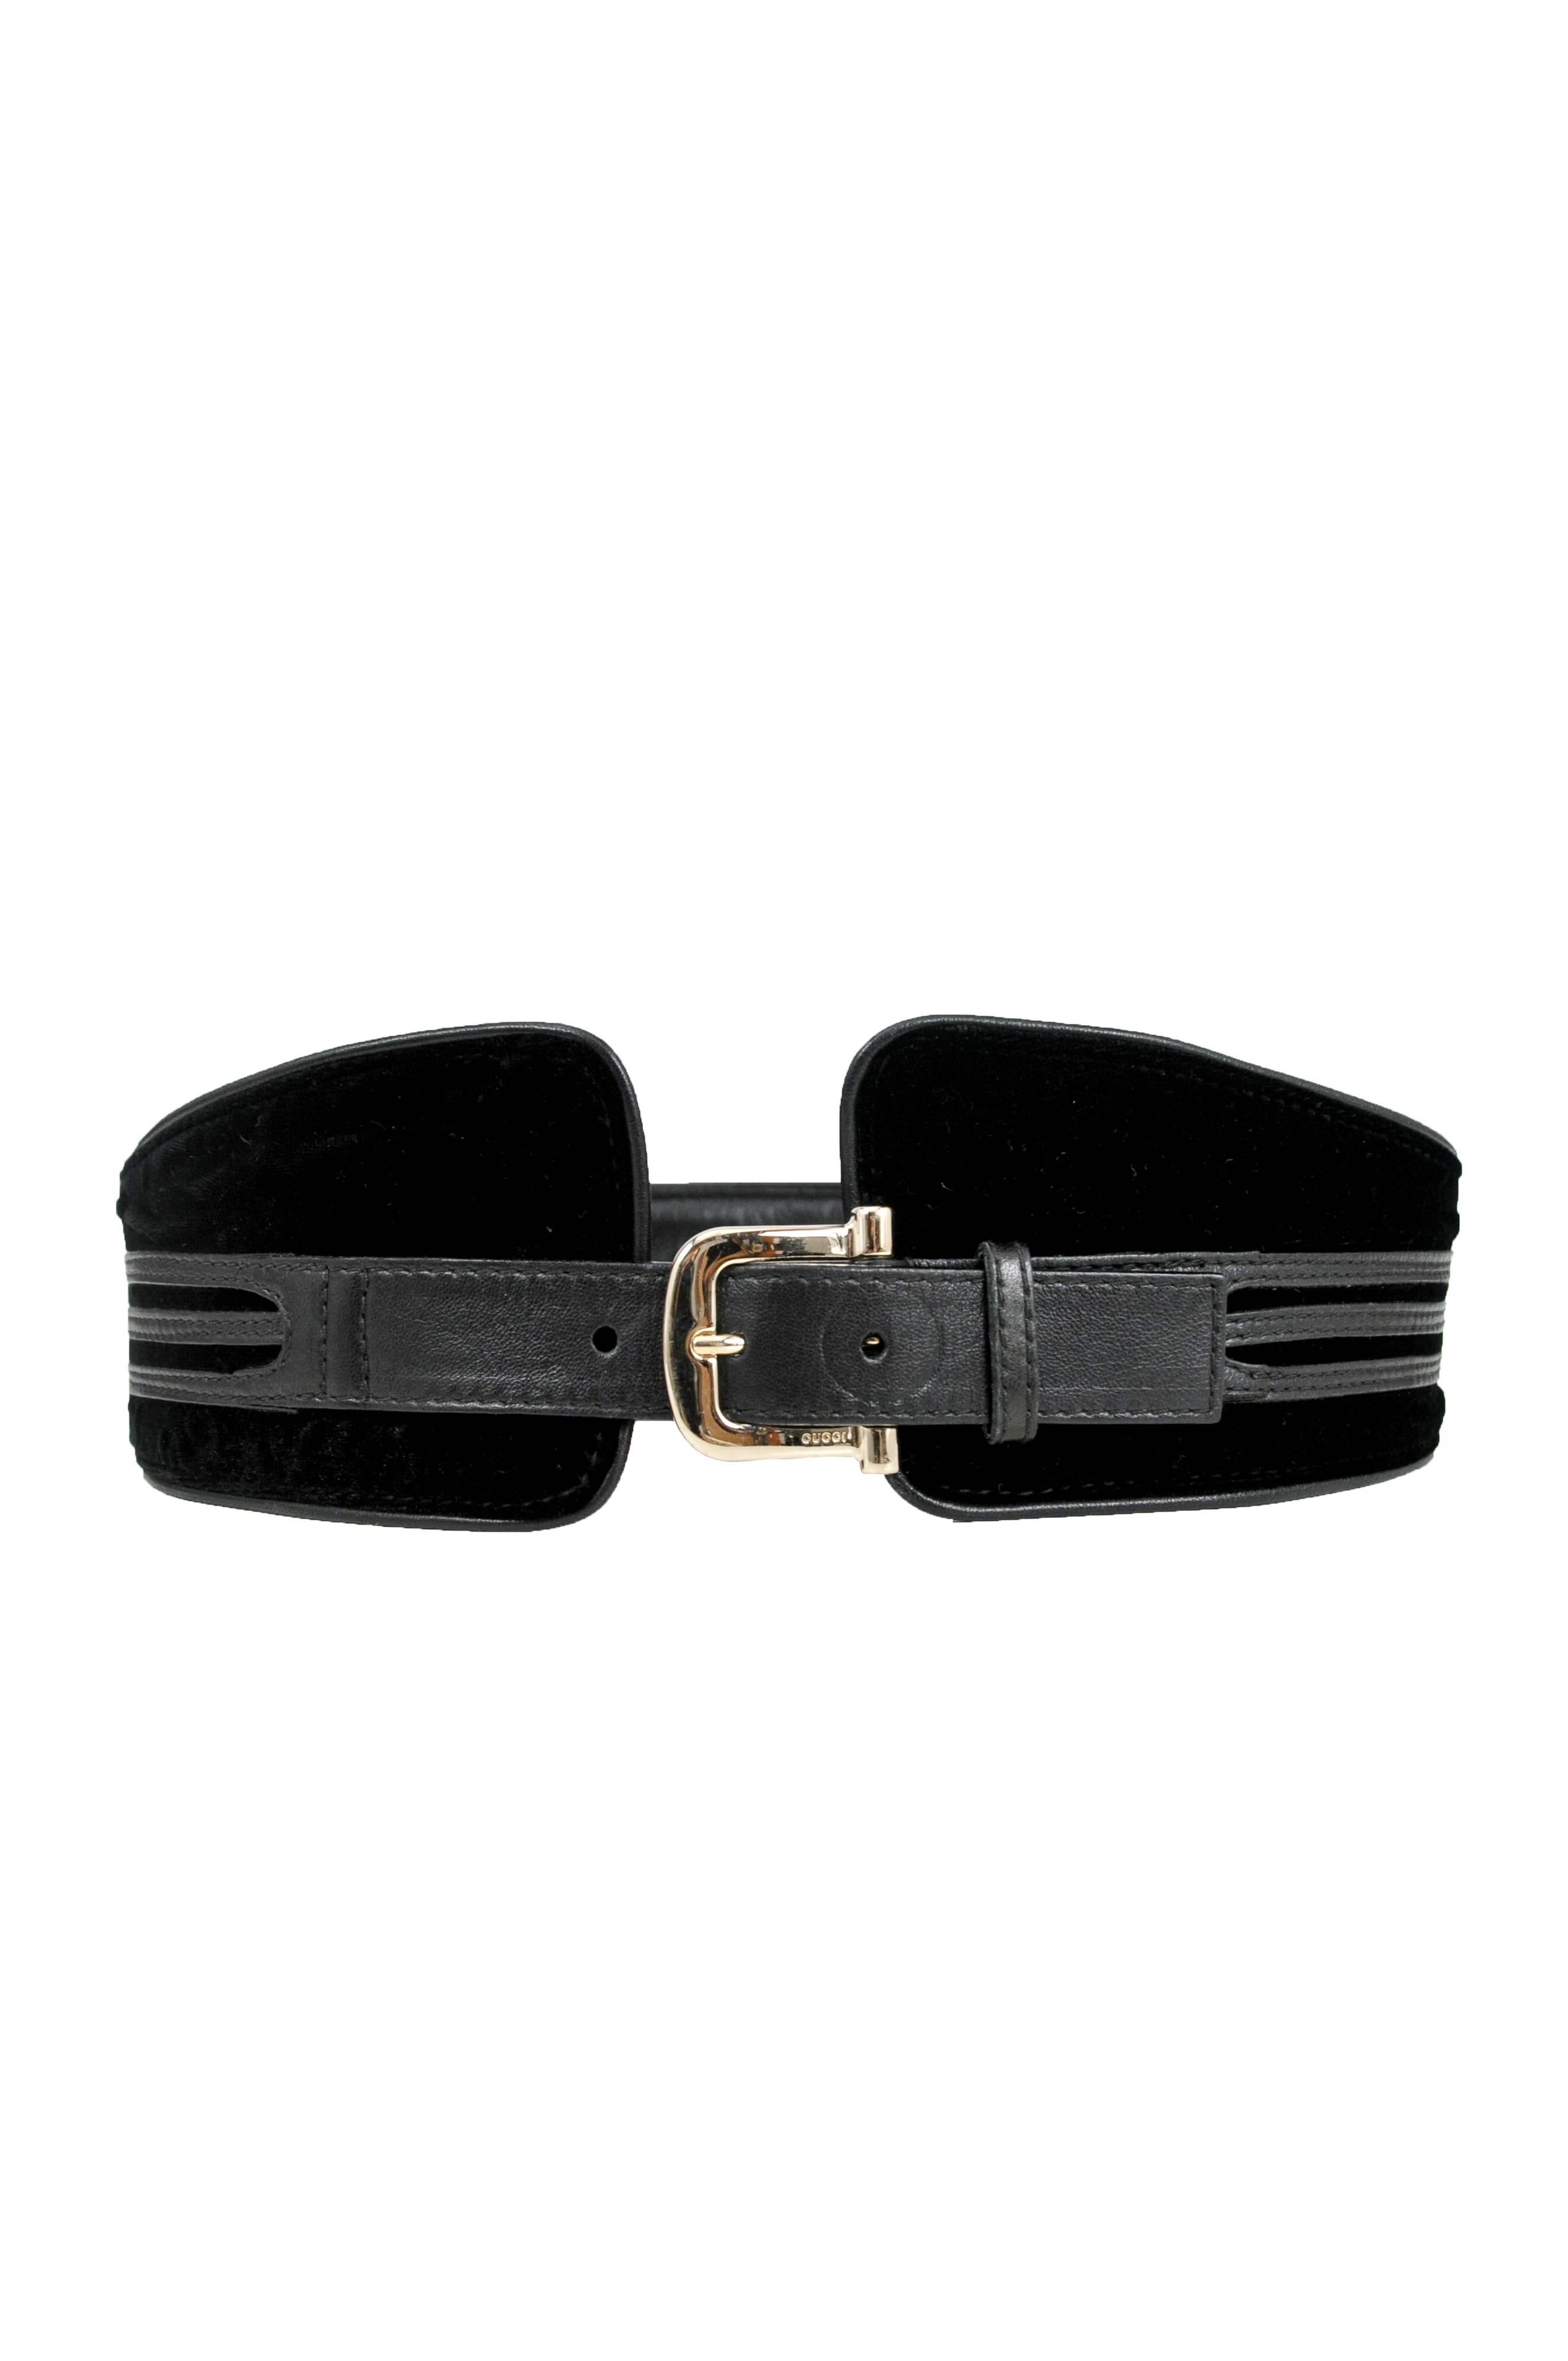 Vintage Tom Ford for Gucci black velvet and leather large belt.
Please inquire for additional images.